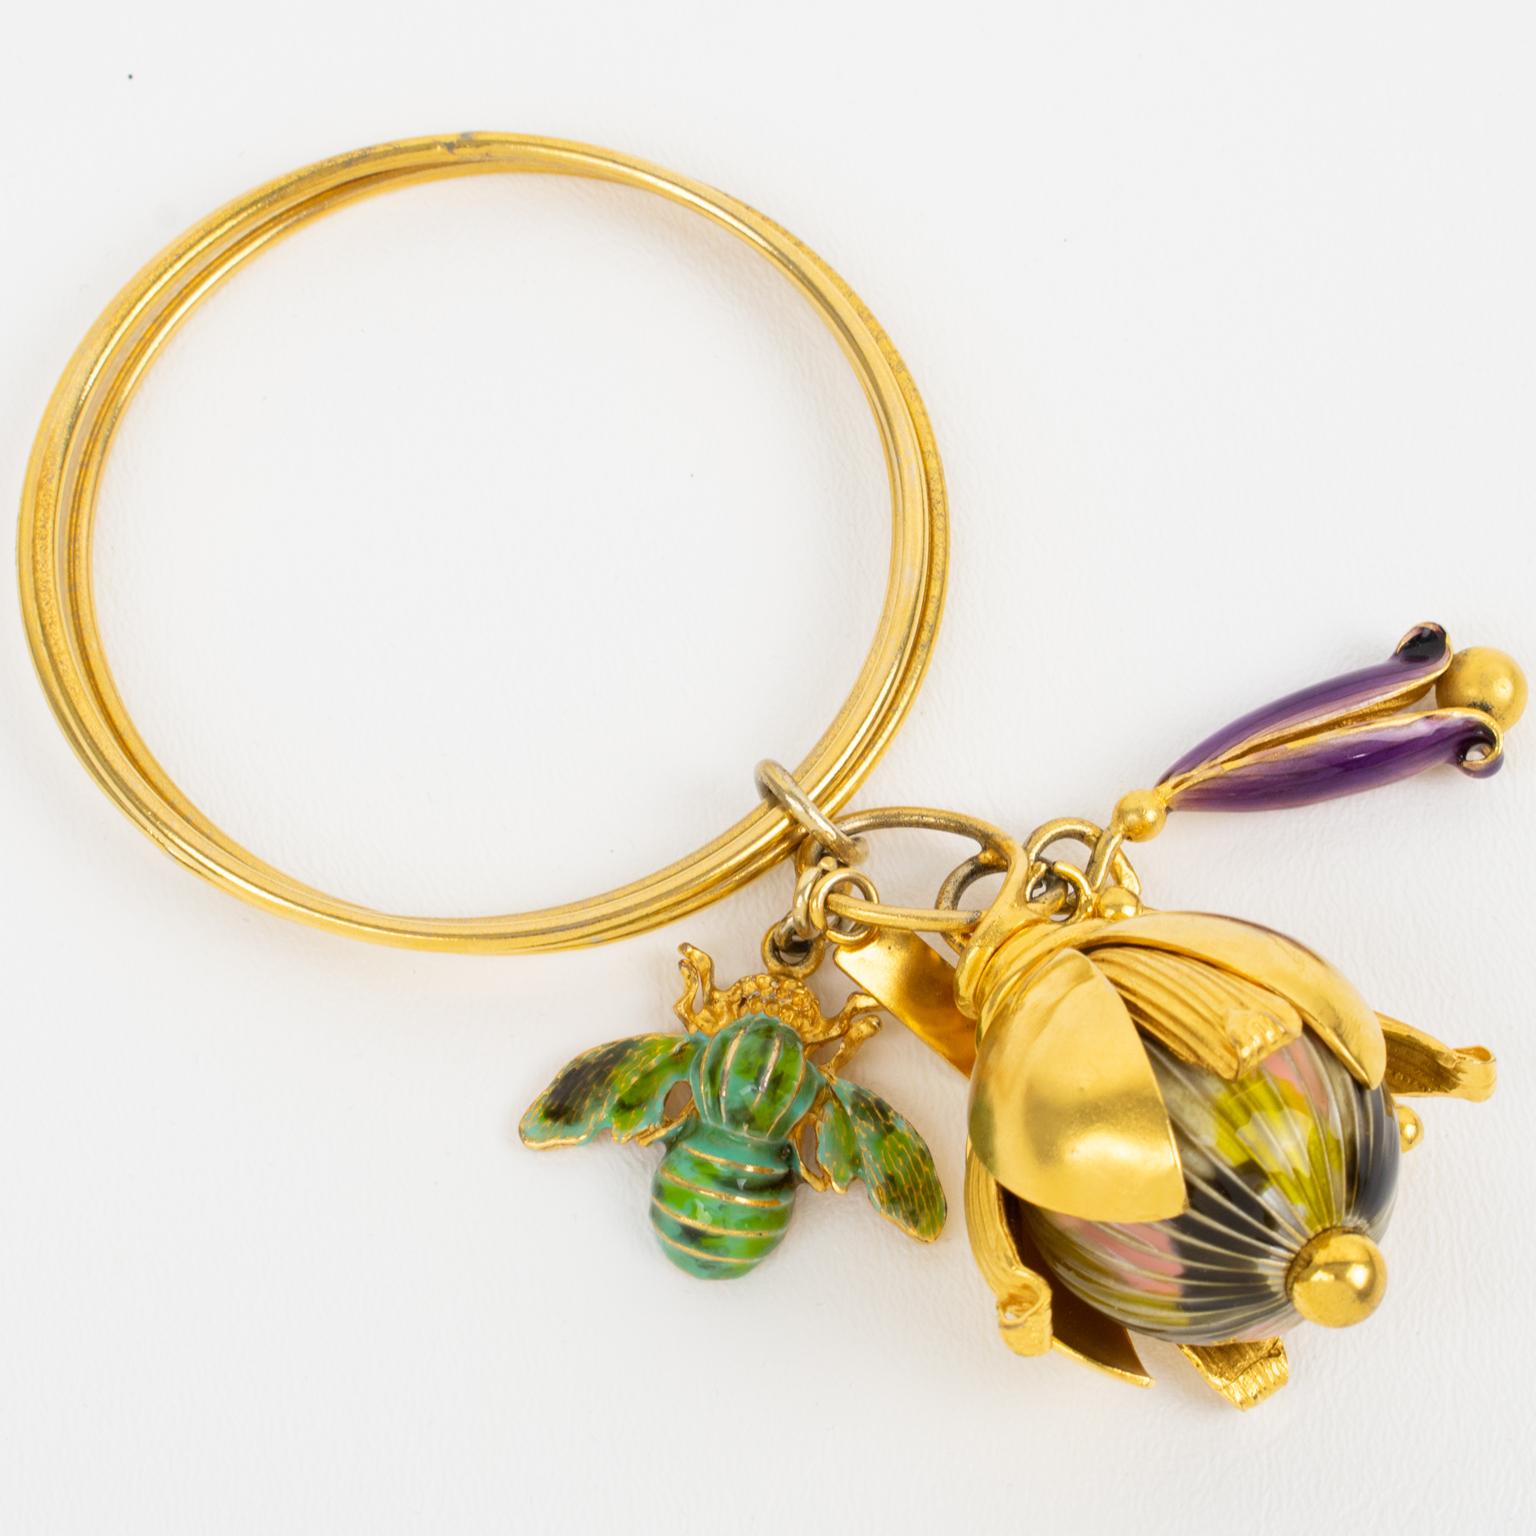 This romantic Missoni, Italy bangle bracelet features a trio of gilded metal thin band bangles ornated with floral dangling charms. The dangle elements are a huge and small flower, complimenting a bumble bee. The enamel colors are assorted green,